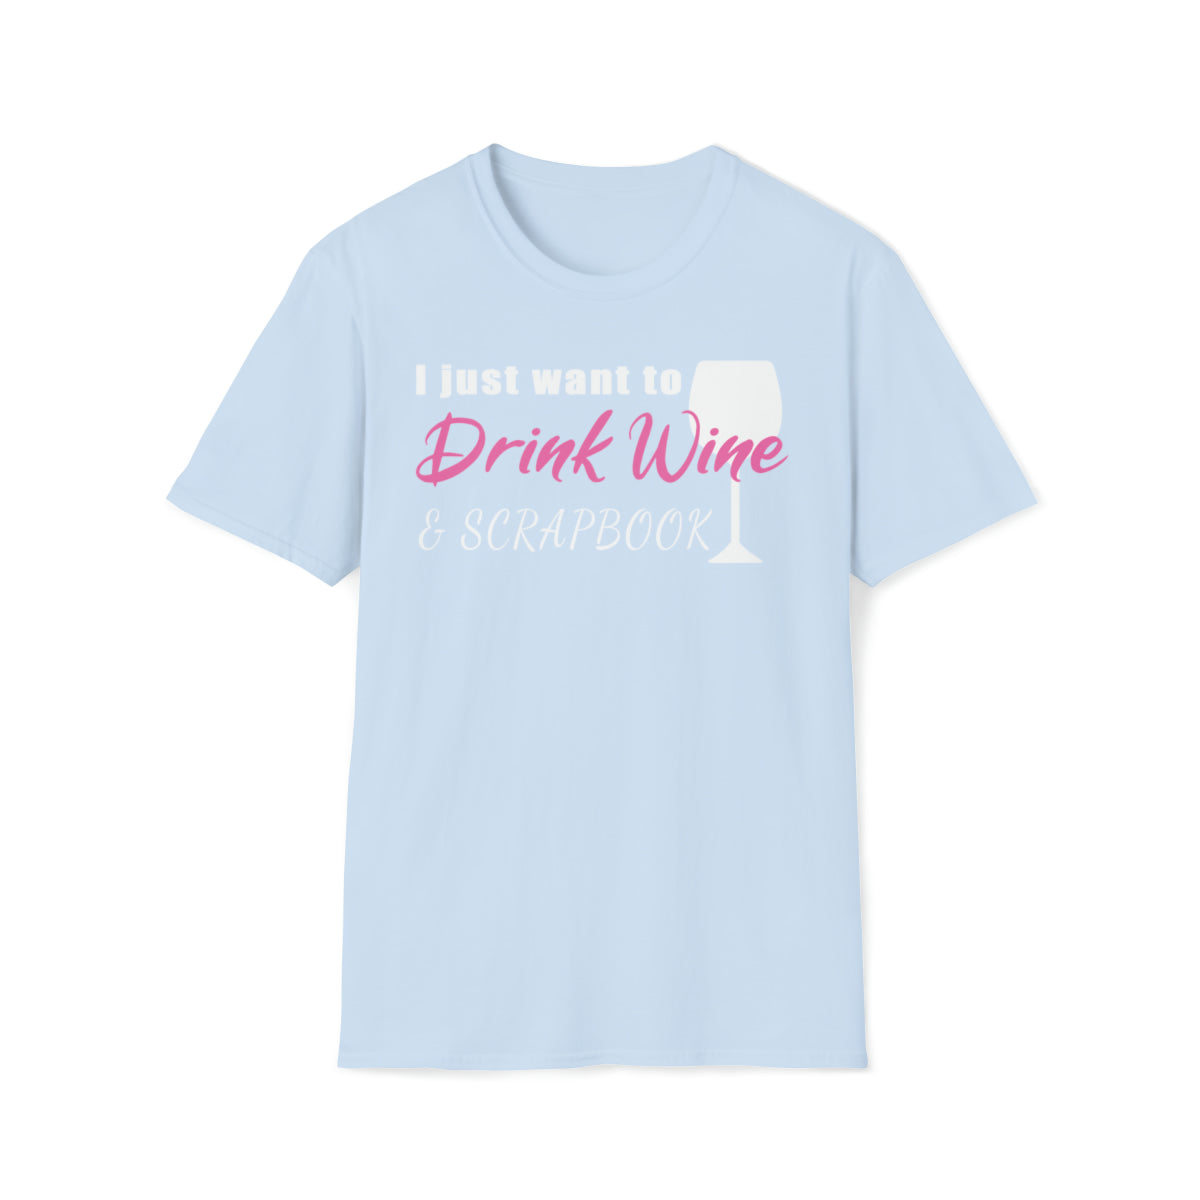 I Just Want to Drink Wine and Scrapbook - Short Sleeve Unisex Soft Style T-Shirt